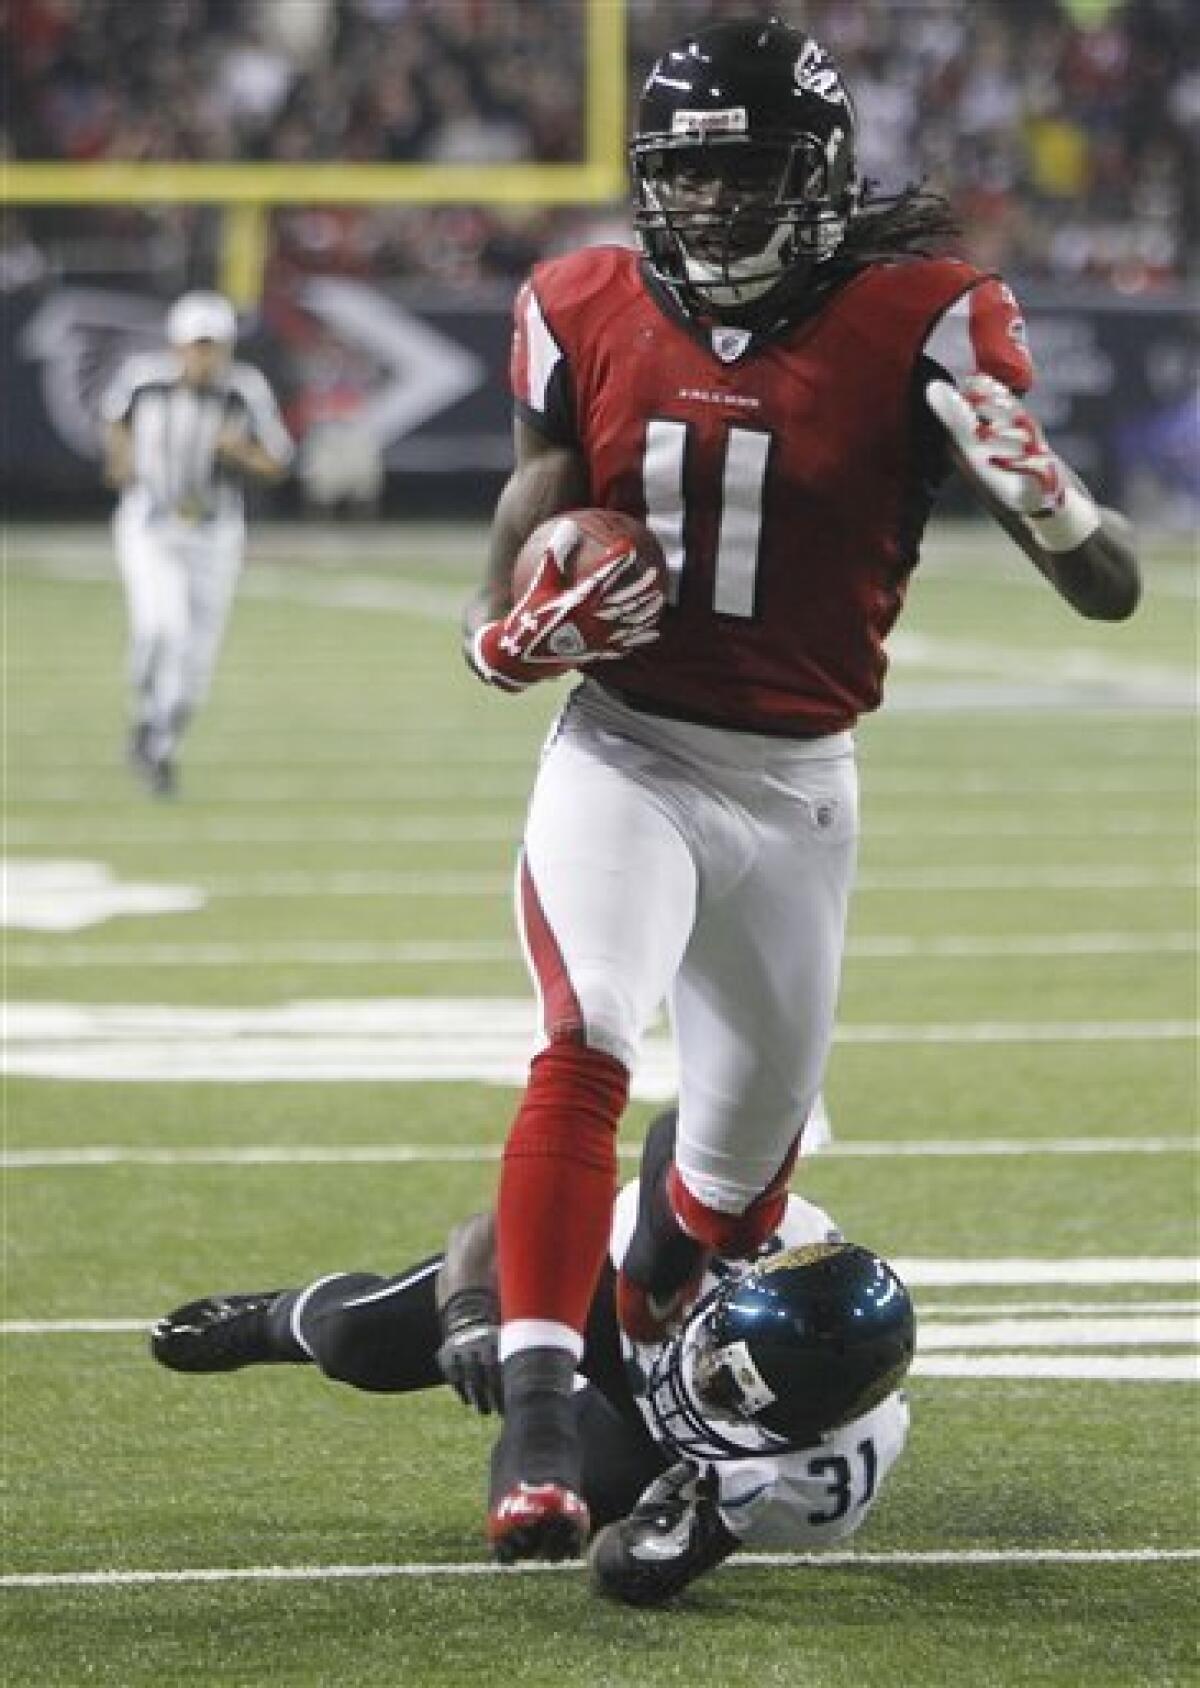 Falcons take 10-0 lead over Jags in 1st quarter - The San Diego